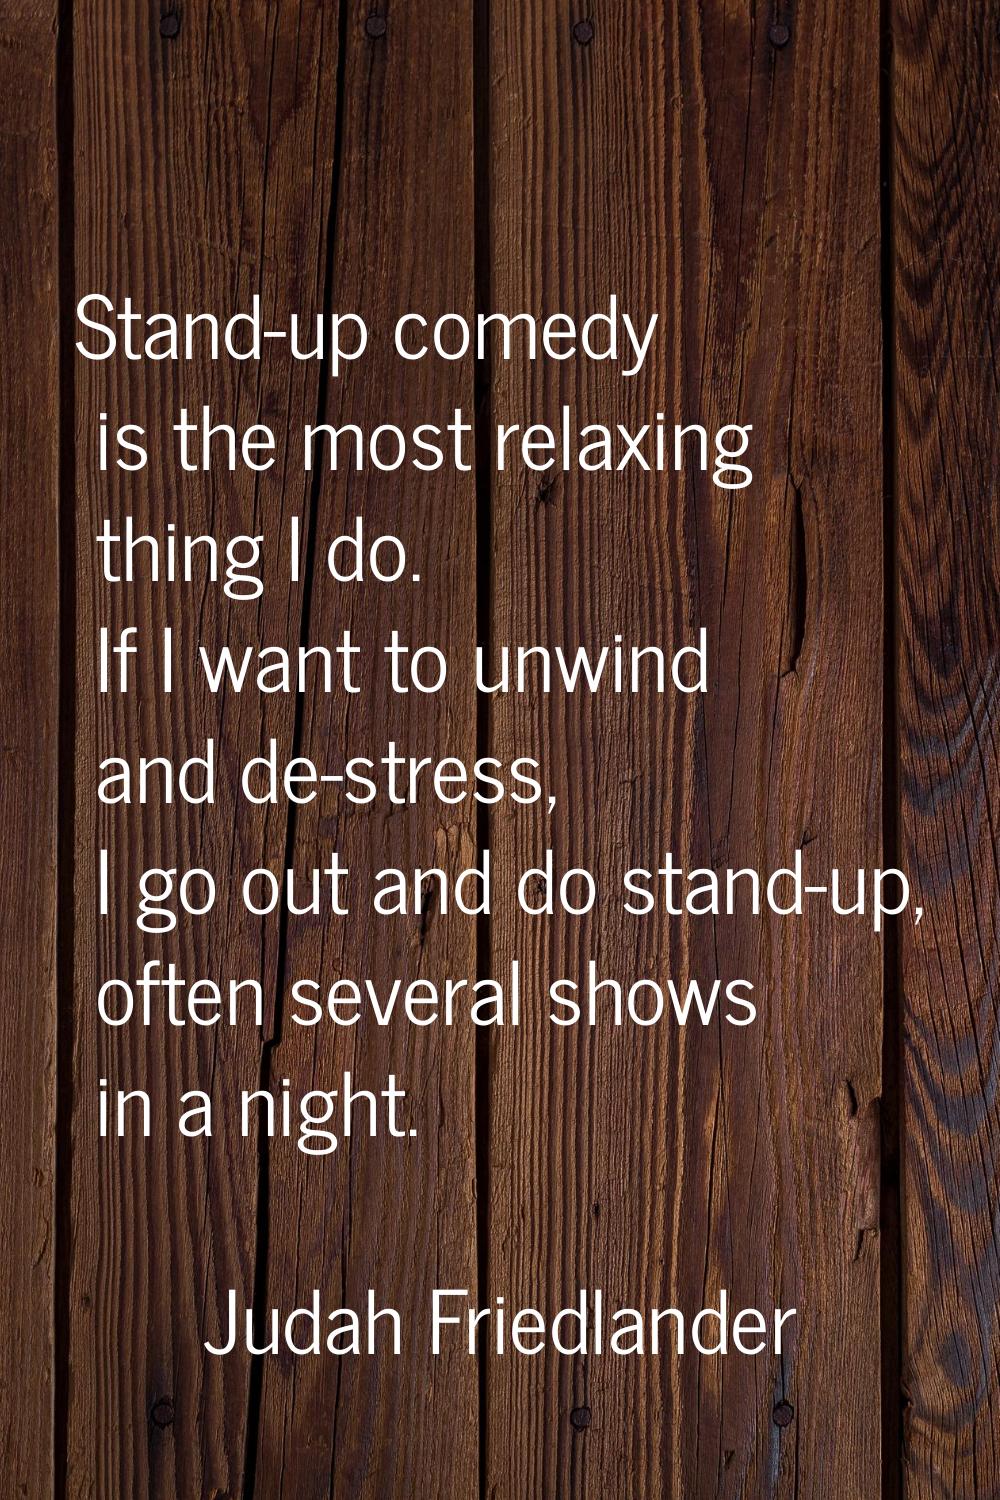 Stand-up comedy is the most relaxing thing I do. If I want to unwind and de-stress, I go out and do